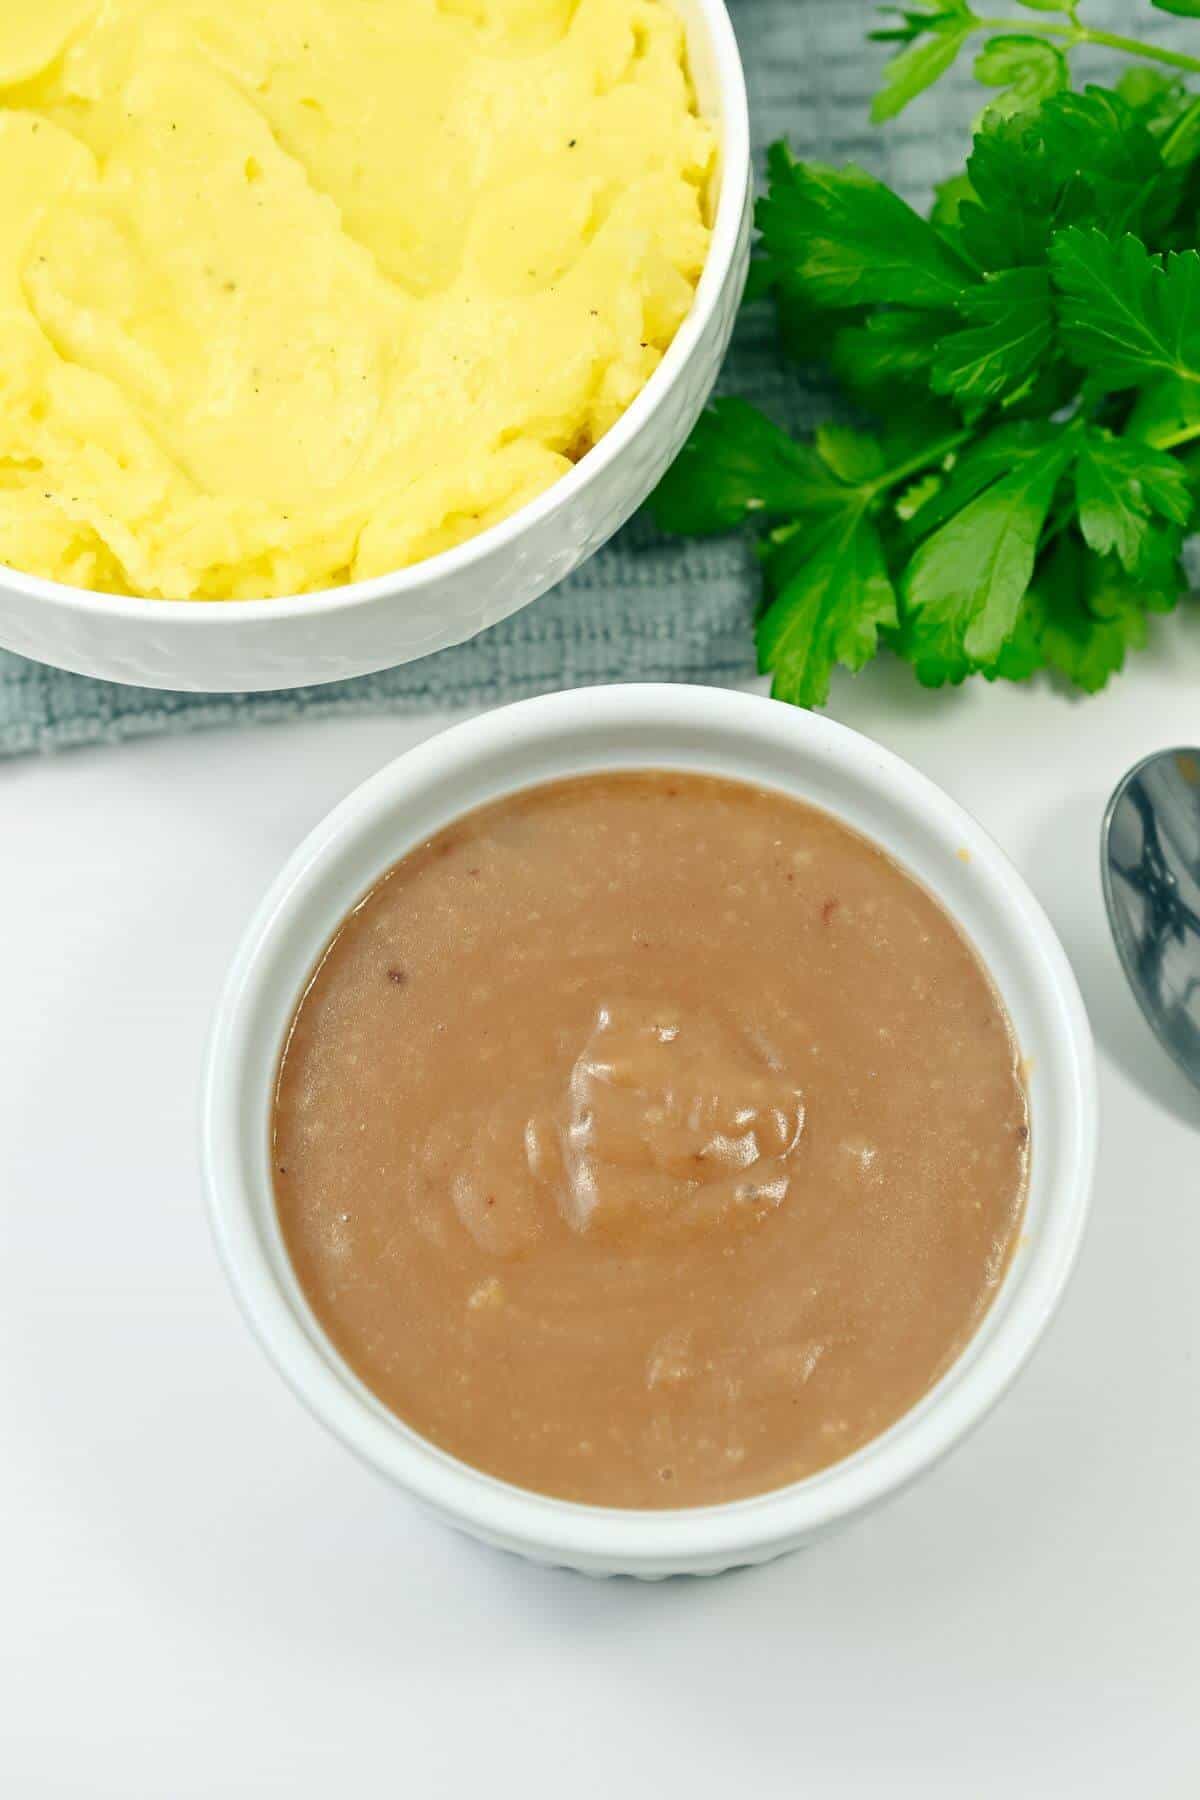 A bowl of gravy next to a bowl of mashed potatoes.